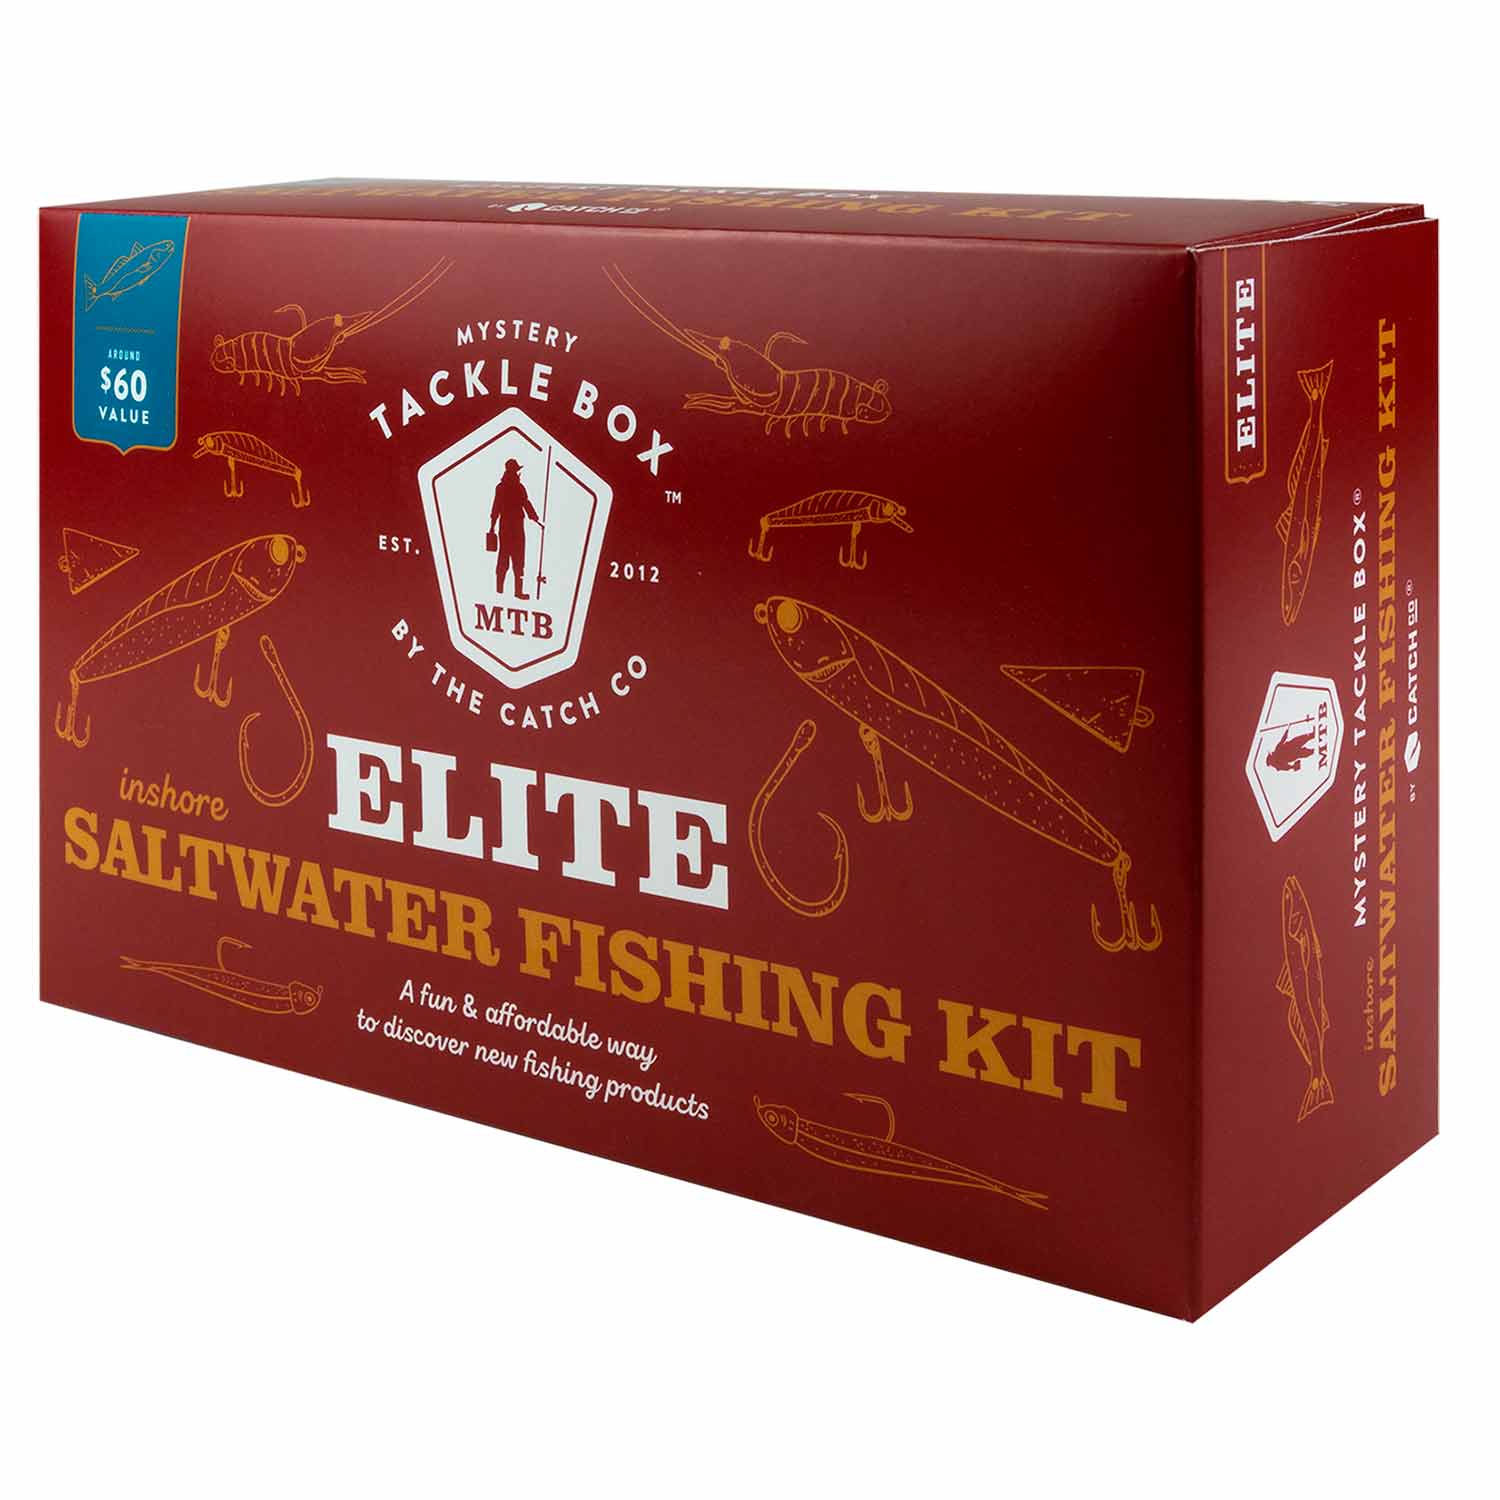 MYSTERY TACKLE BOX Mystery Tackle Box ELITE Inshore Saltwater